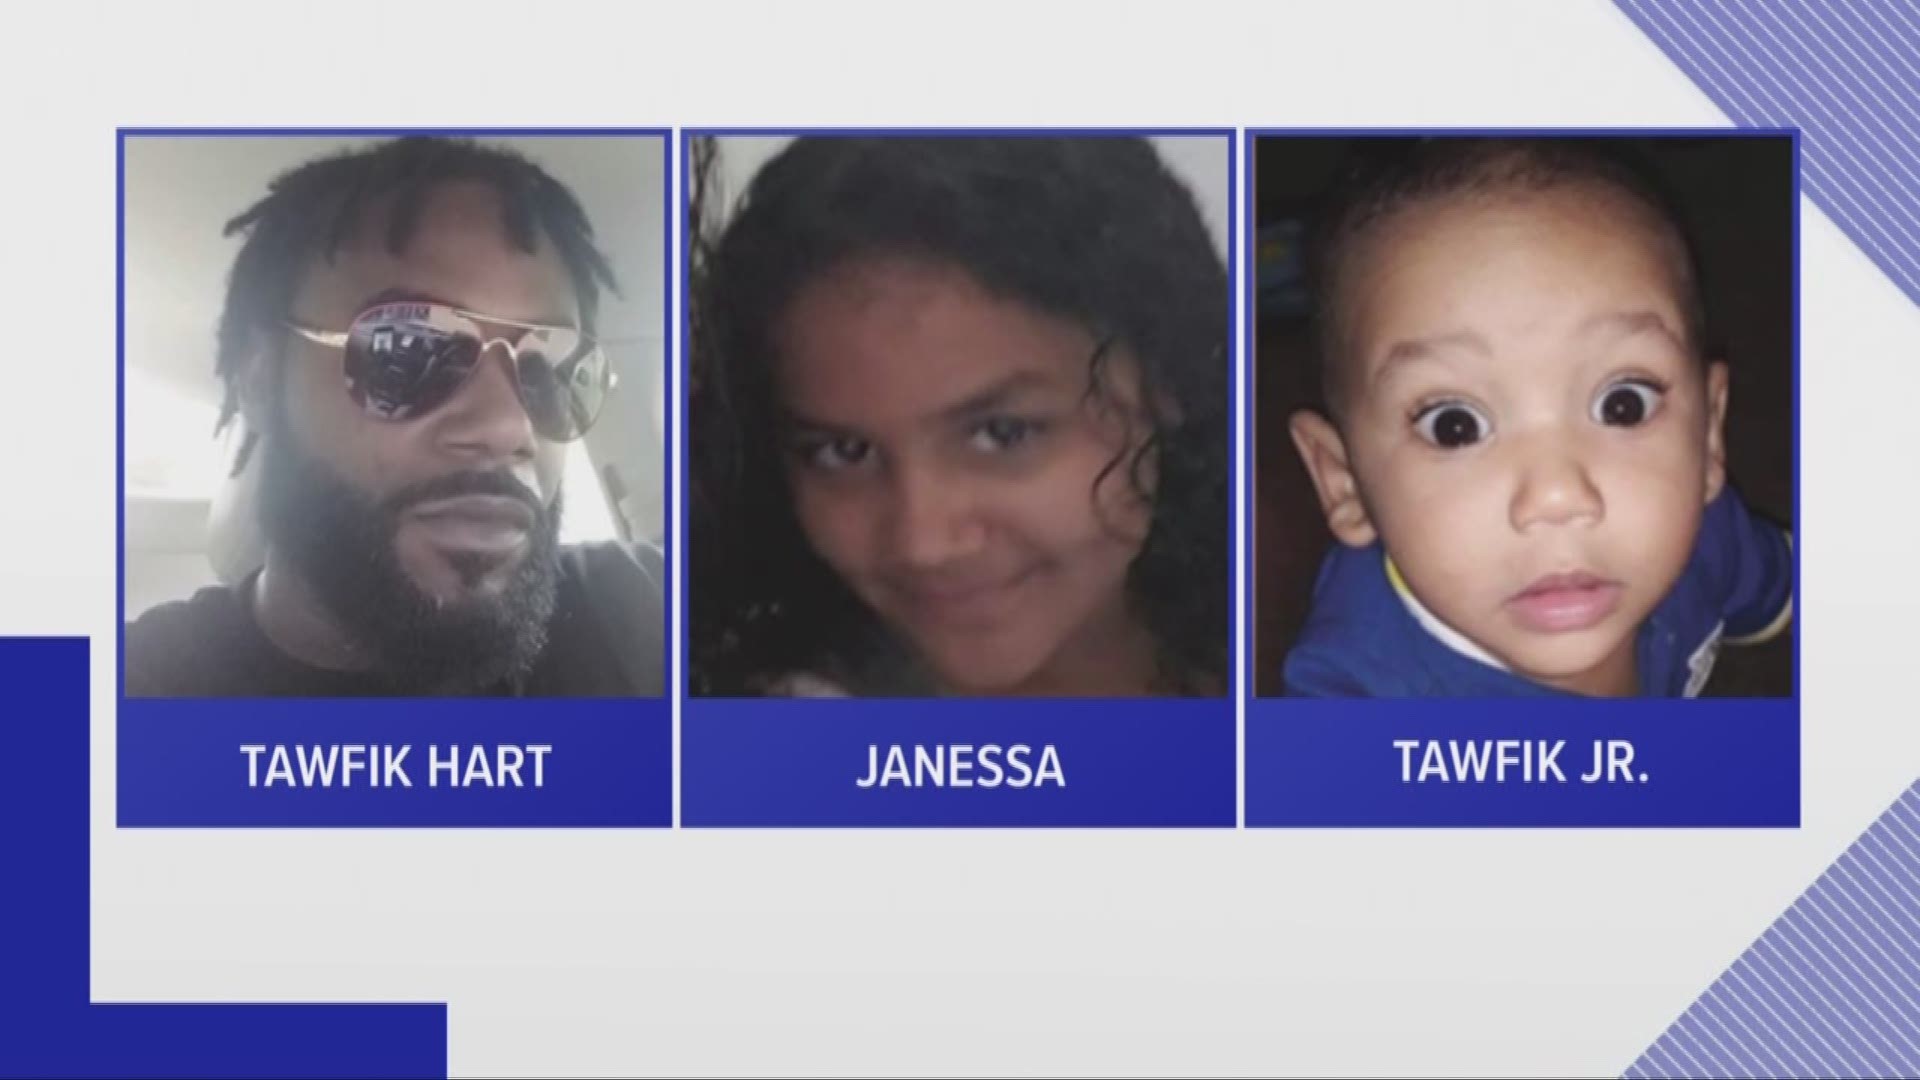 A dad is wanted for breaking into a home and running off with his biological daughter, deputies said.

Tawfik Dimion Hart, 34, broke into the house on Jackson Springs Road where 9-year-old Janessa had been staying, grabbed her and left, according to the Hillsborough County Sheriff's Office. 

Deputies said Hart also has his 10-month-old son, Tawfik Jr., with him.